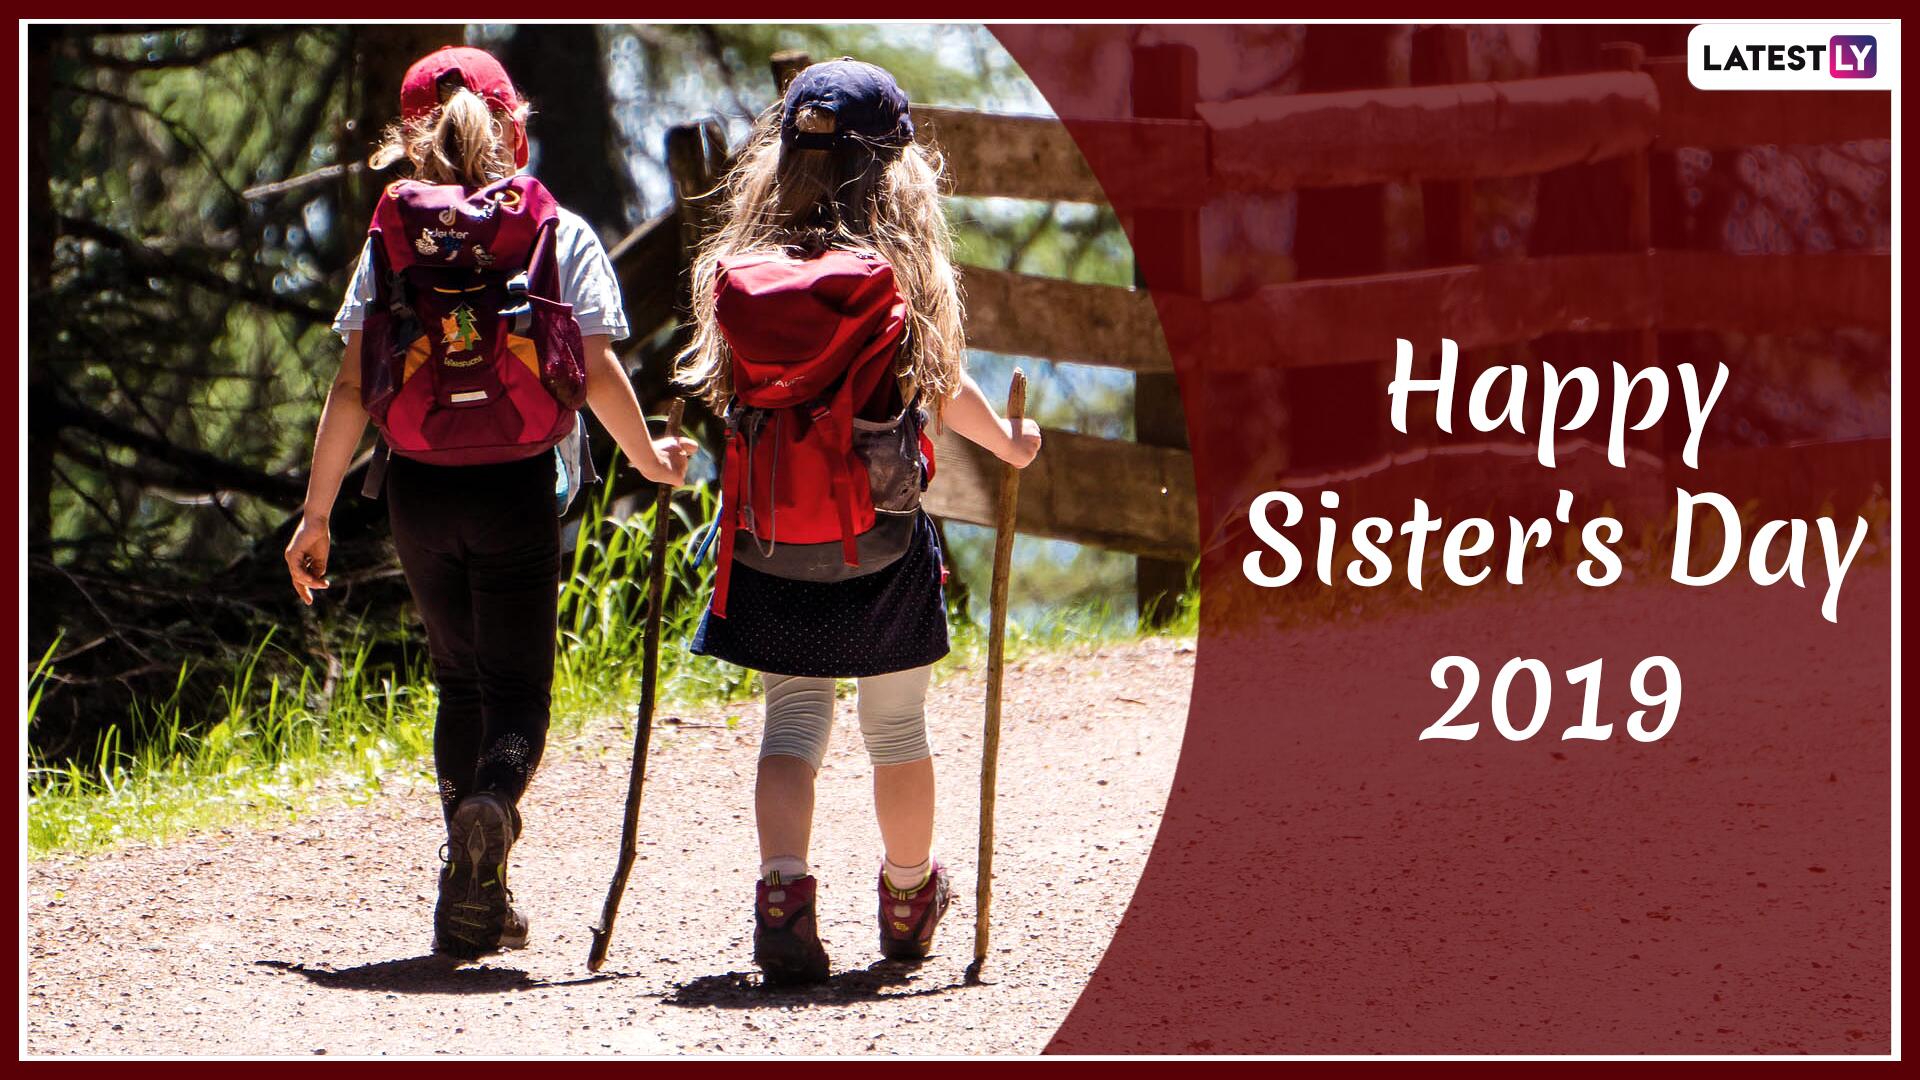 Sisters Day In India 2019 - HD Wallpaper 